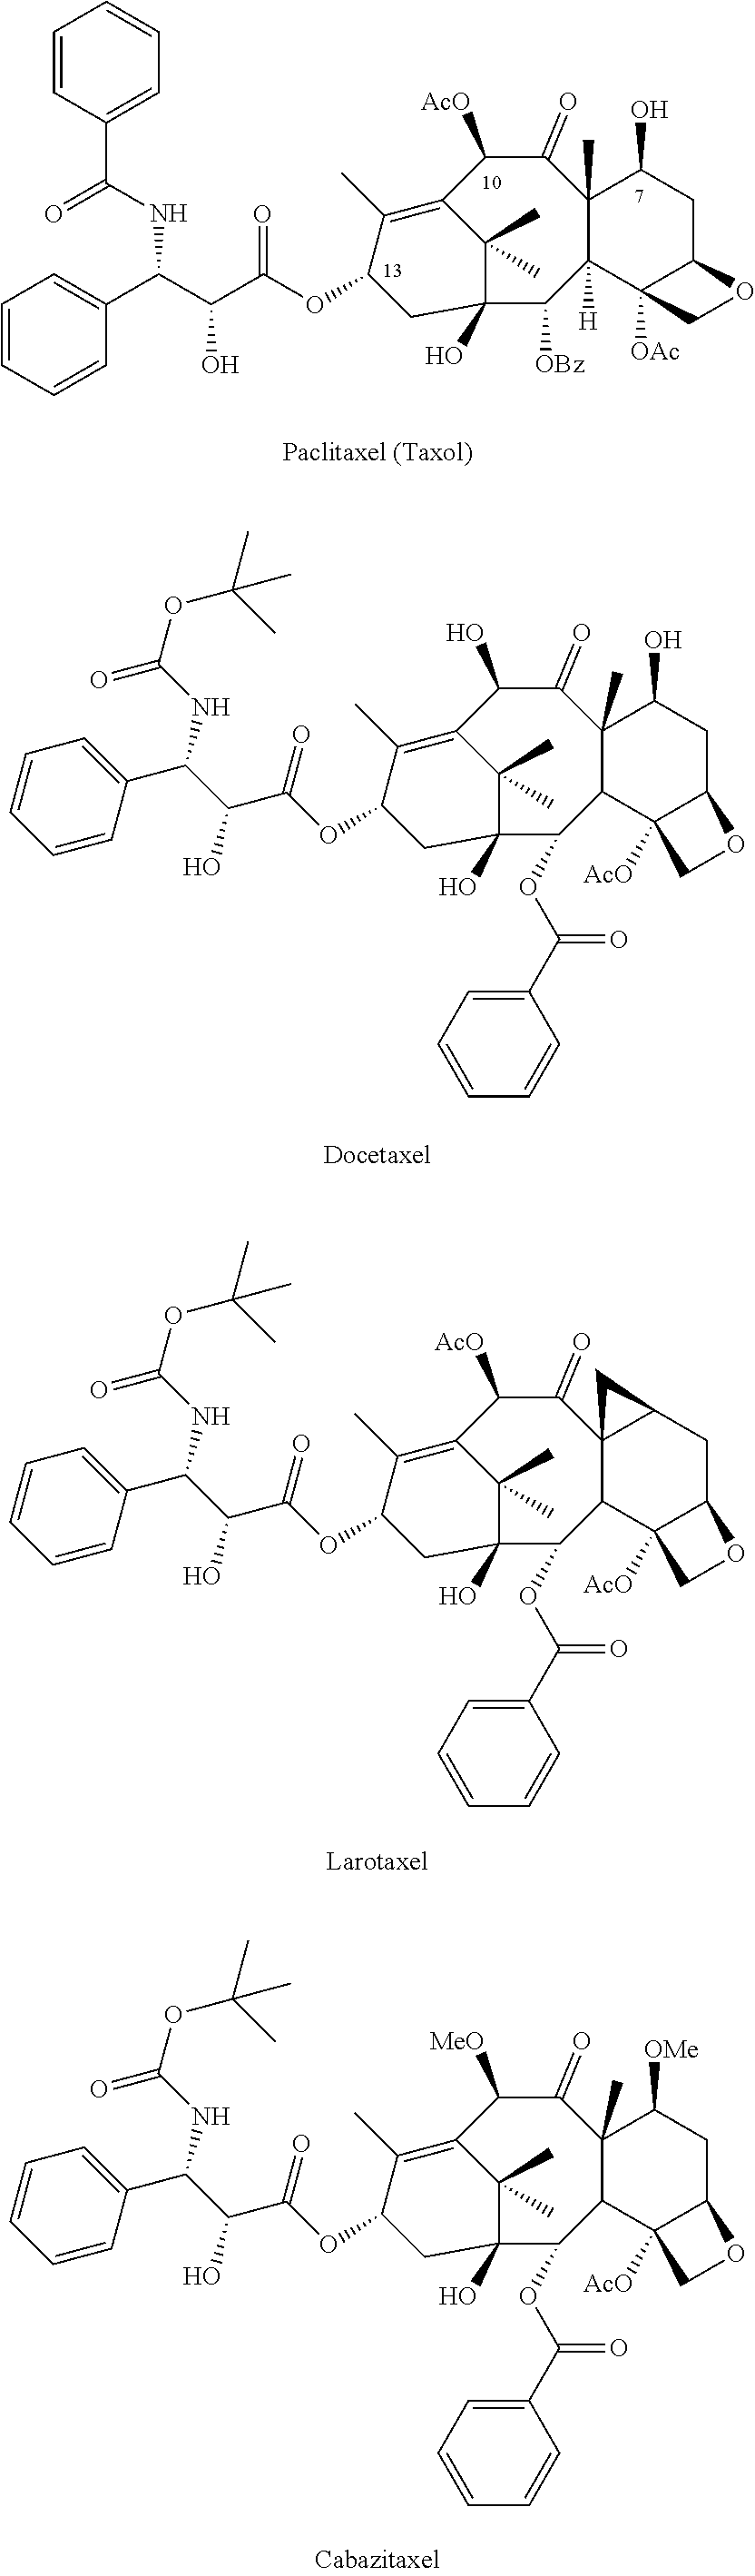 Process for preparing taxoids from baccatin derivatives using lewis acid catalyst